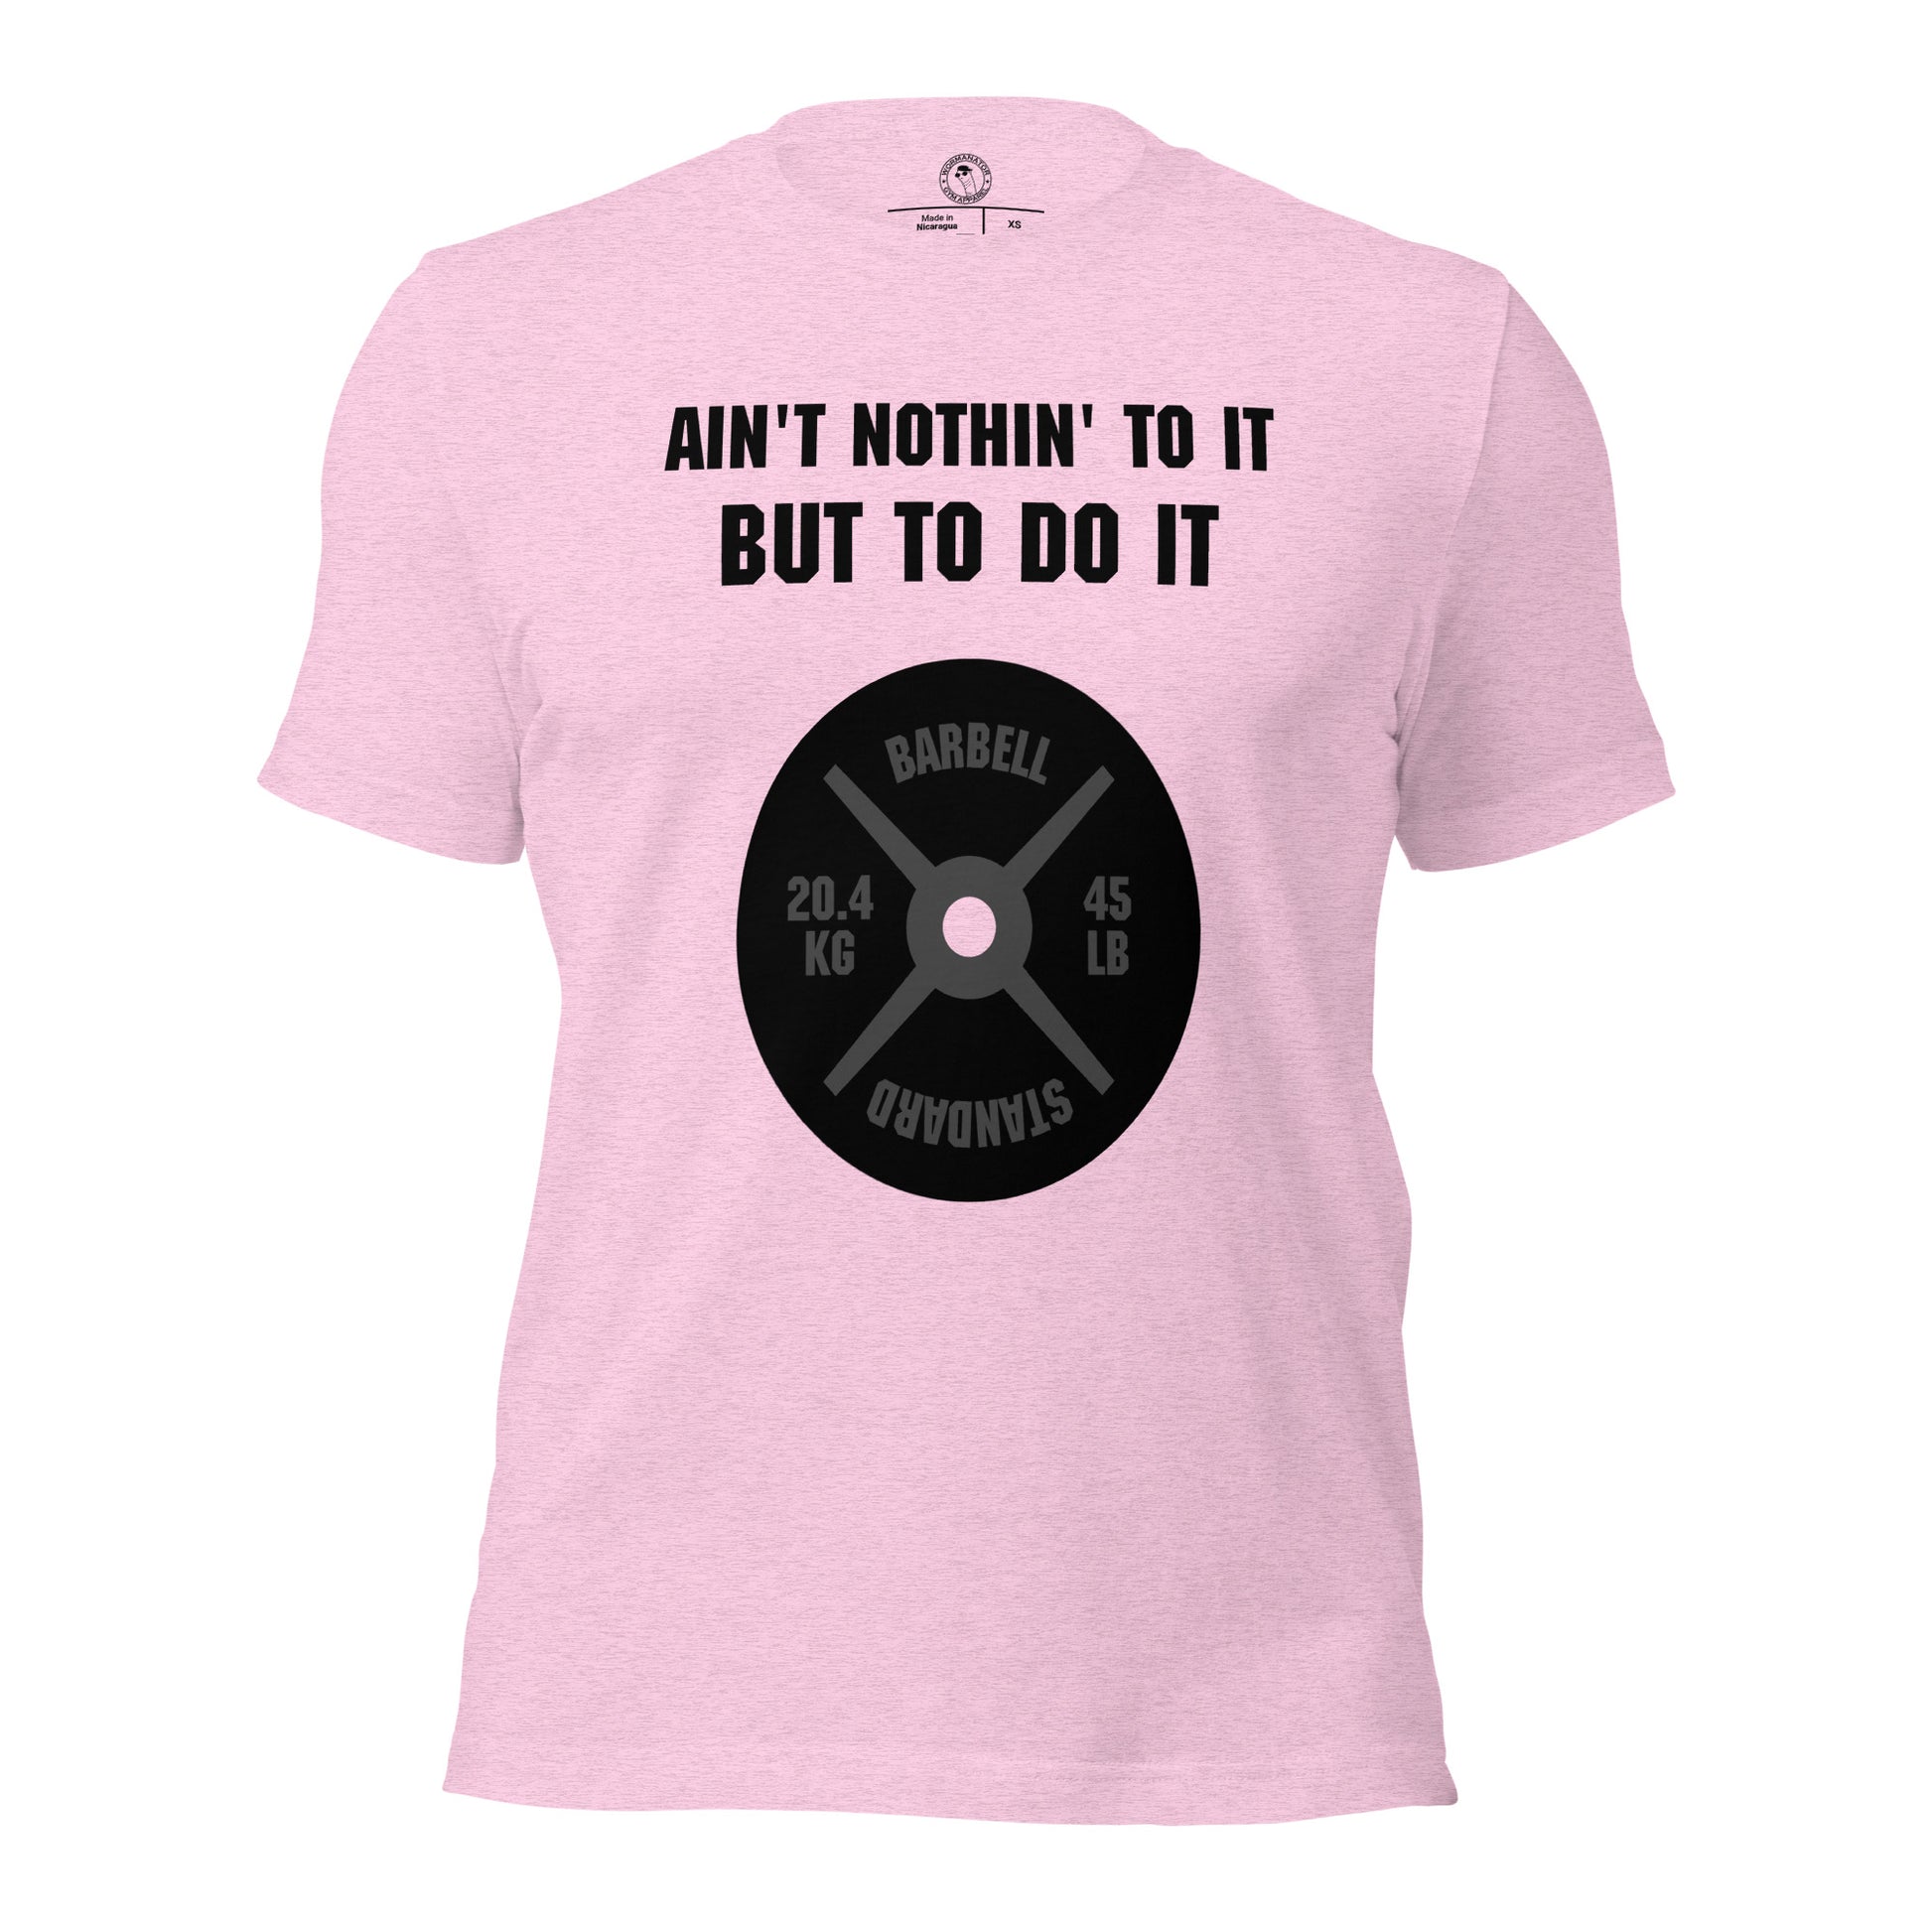 Ain't Nothin' To It But To Do It Shirt in Heather Prism Lilac